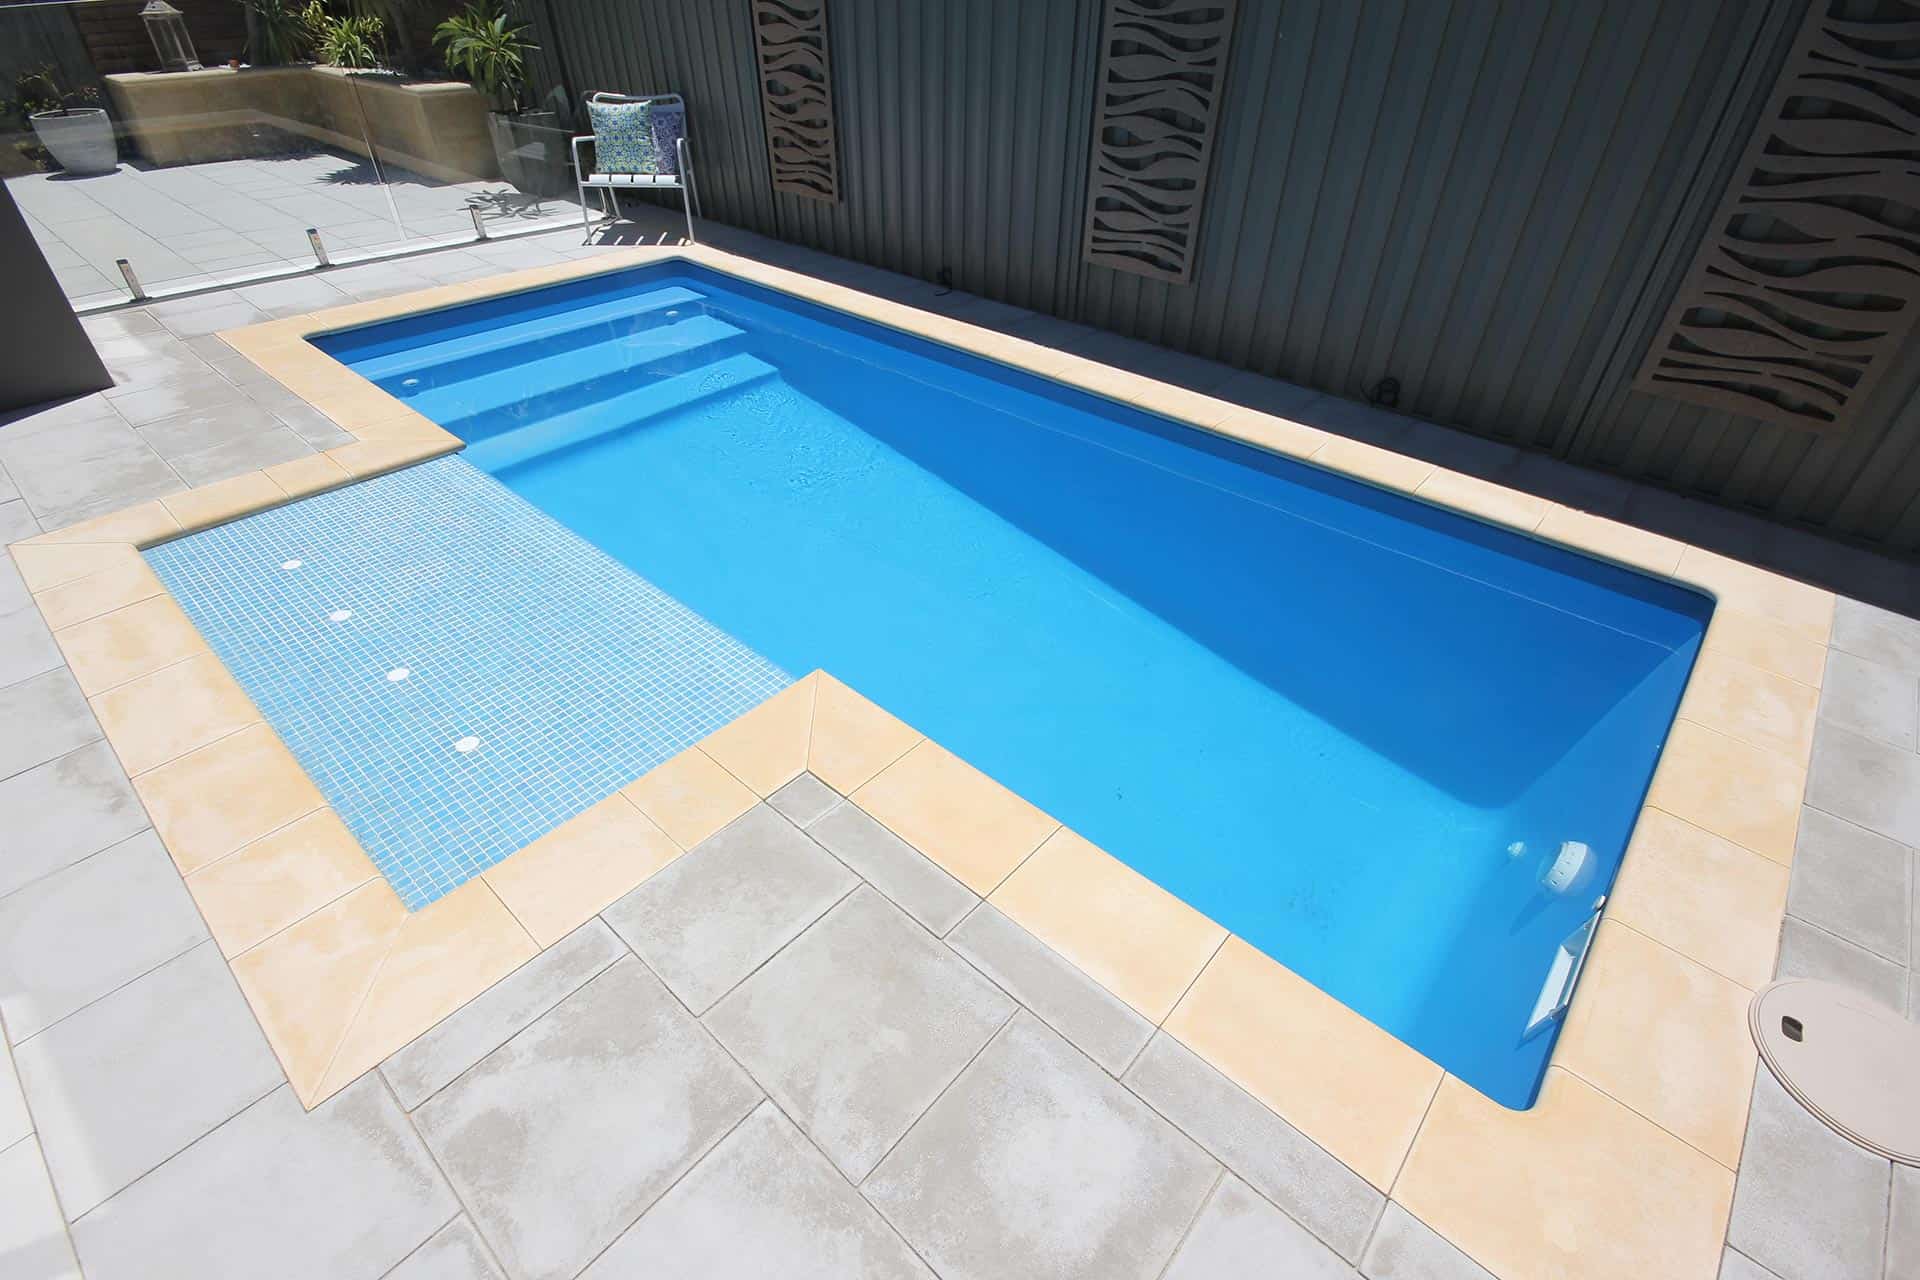 Vaucluse Pool safety certification